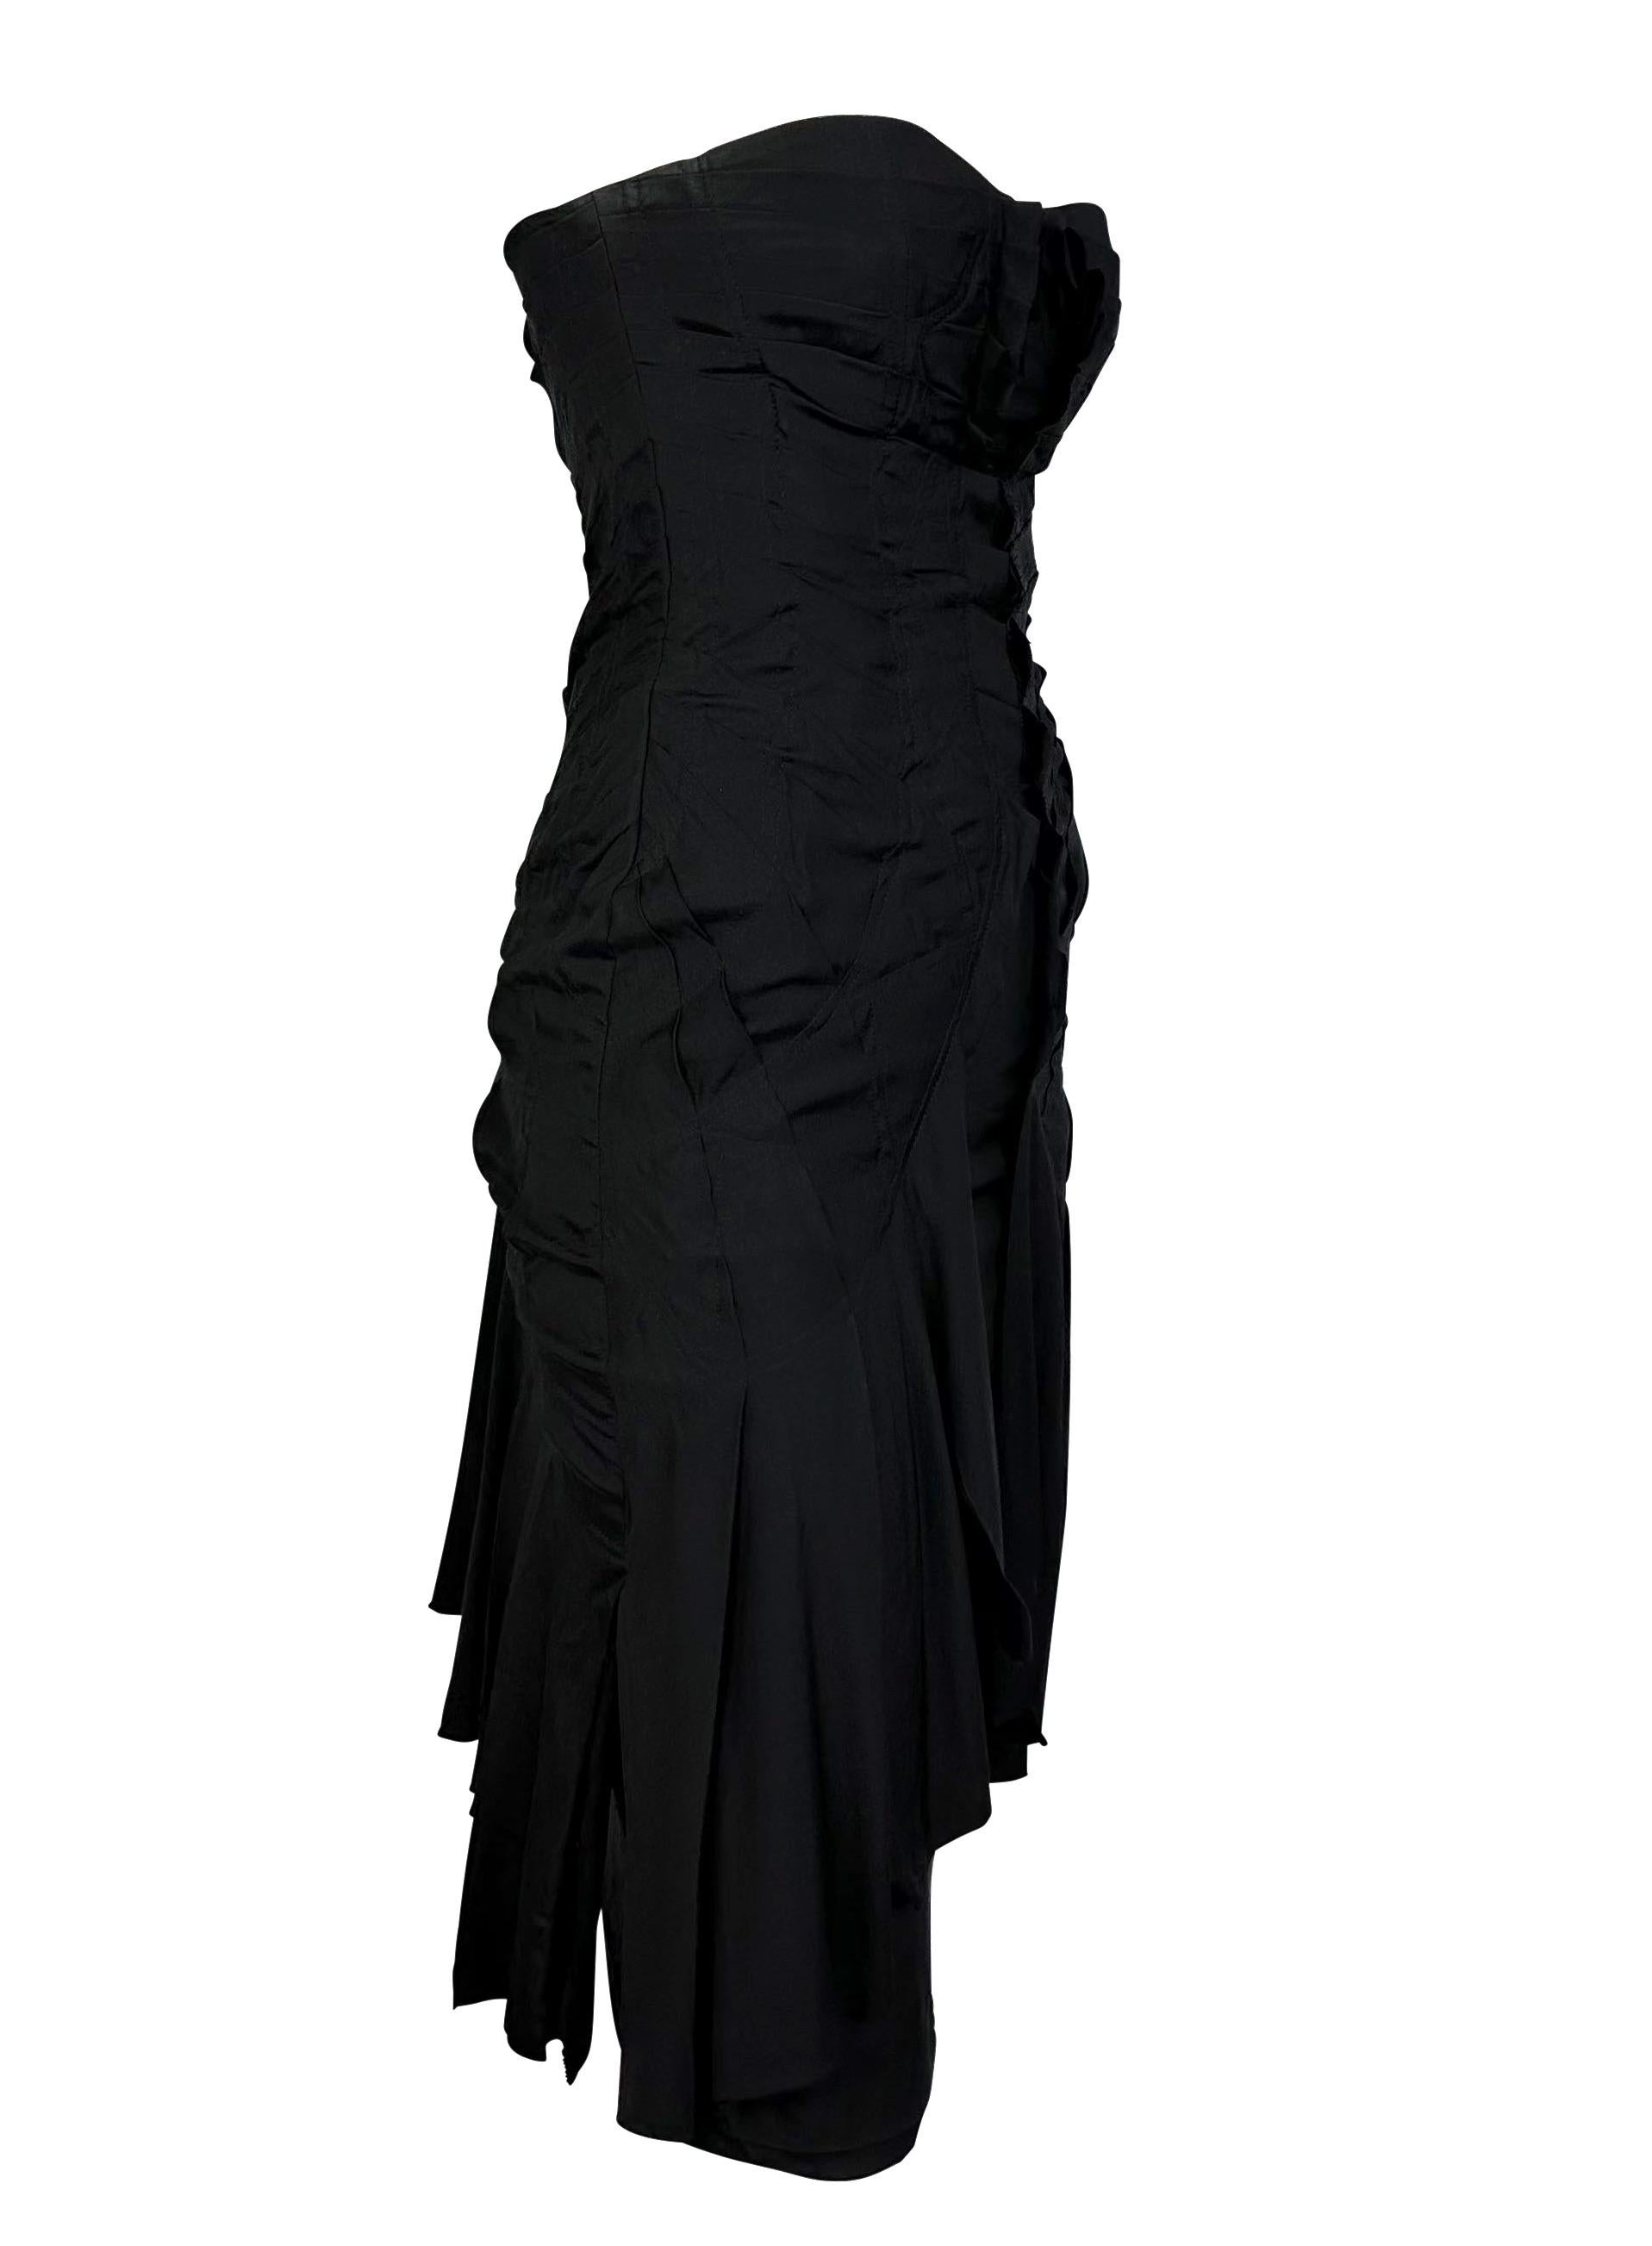 S/S 2004 Gucci by Tom Ford Fan Pleated Silk Ribbon Cutout Black Strapless Dress For Sale 3